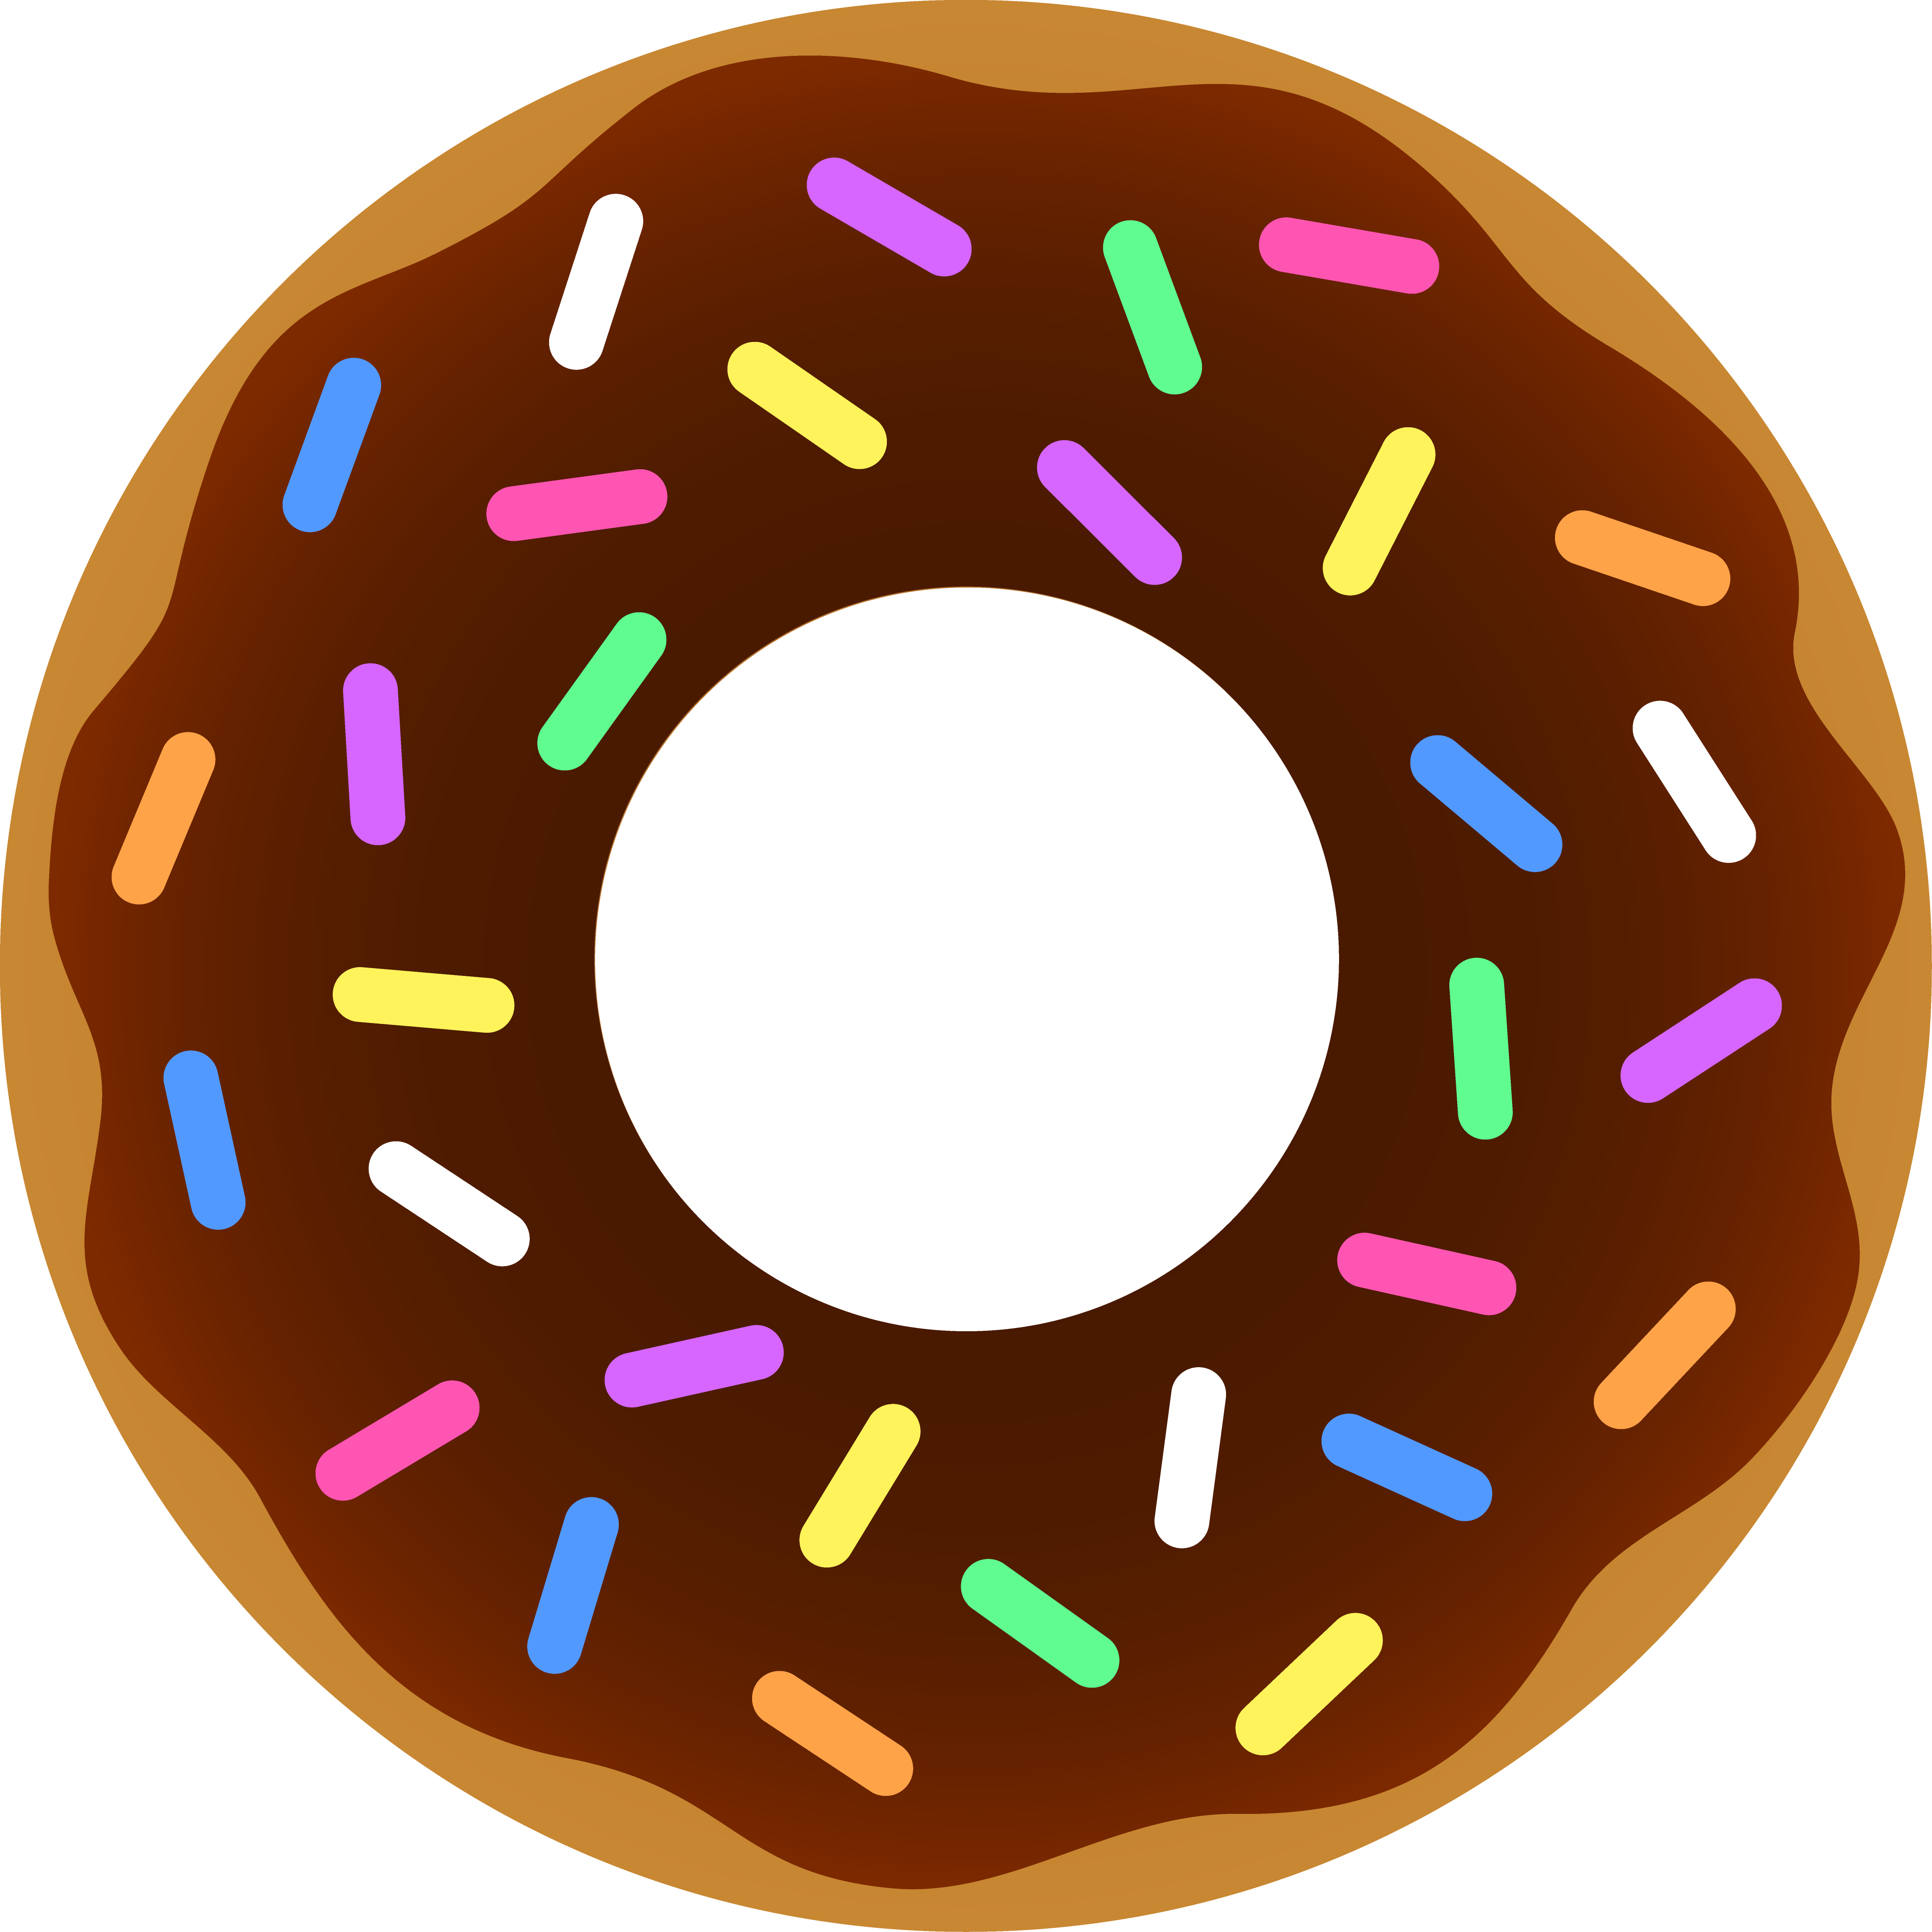 Donut Vector Free Download - ClipArt Best